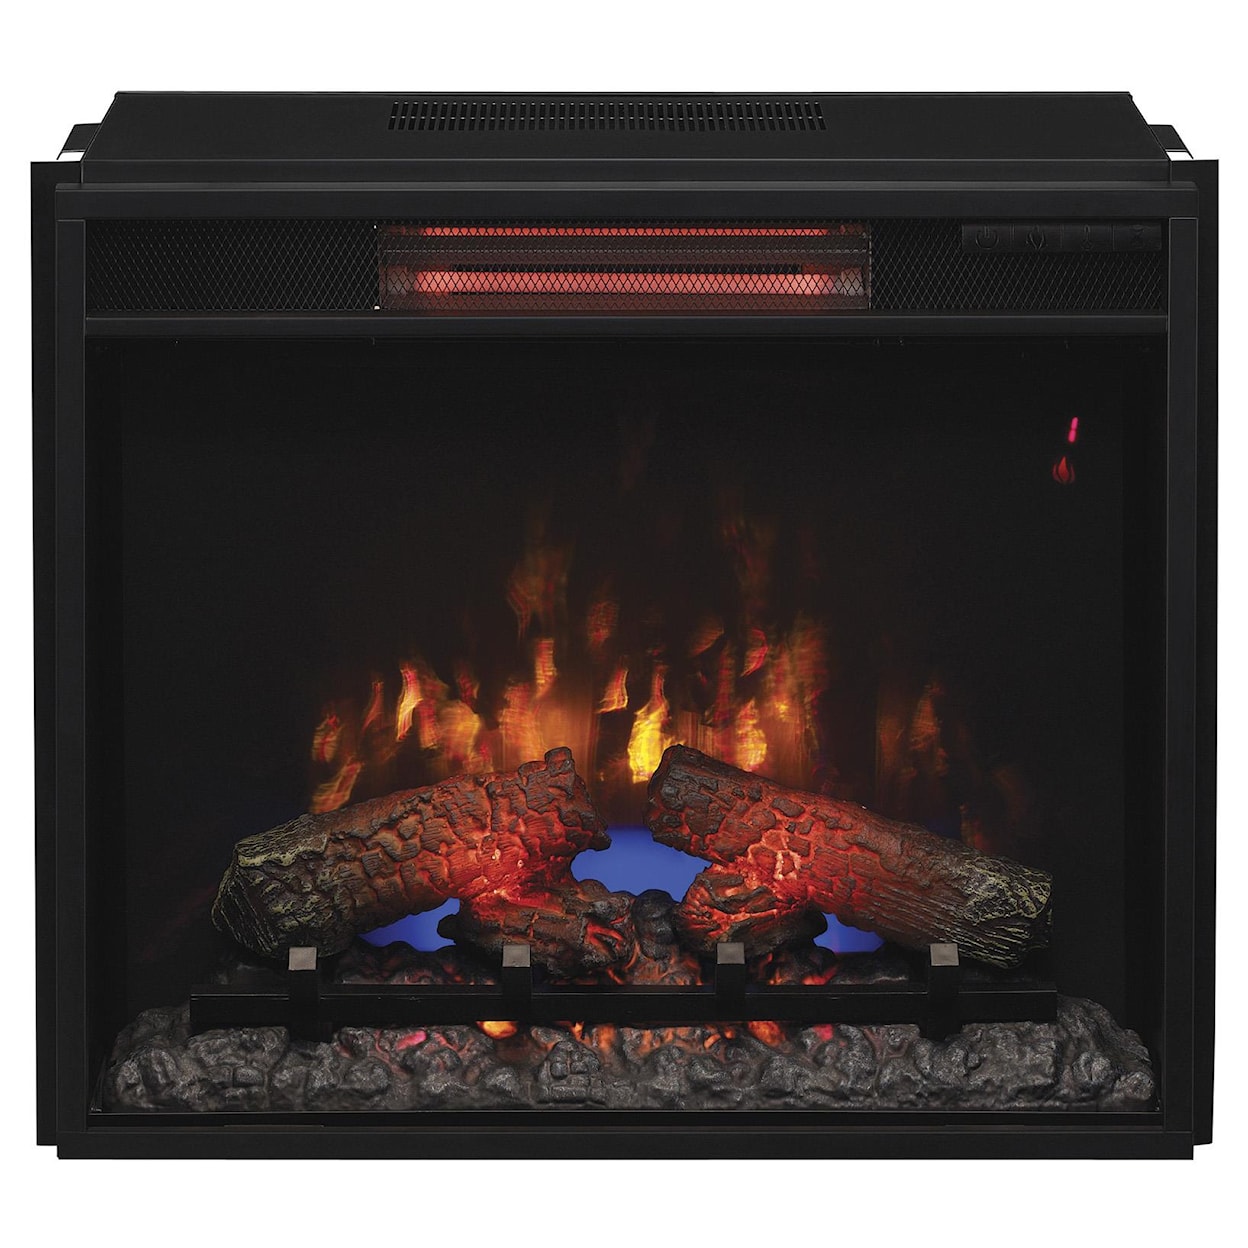 ClassicFlame Fireplace Inserts 23" Spectrafire+ Electric Insert